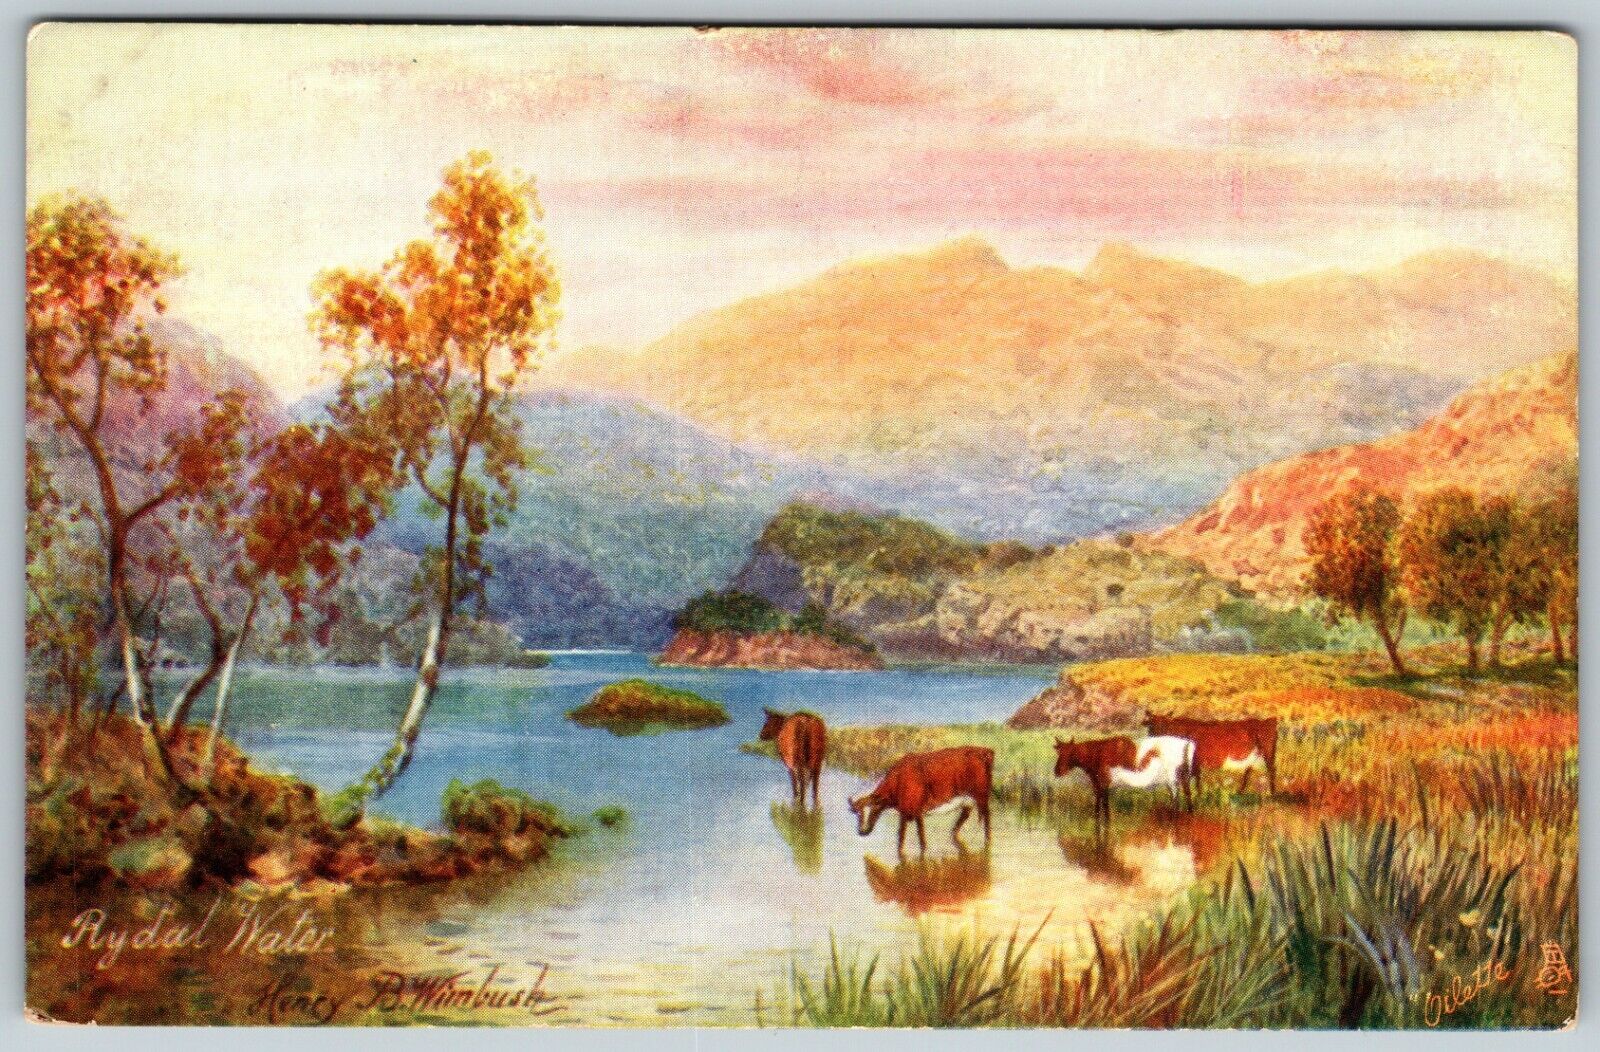 Rydal Water, Picturesque English Lakes, Tucks Oilette  - Postcard